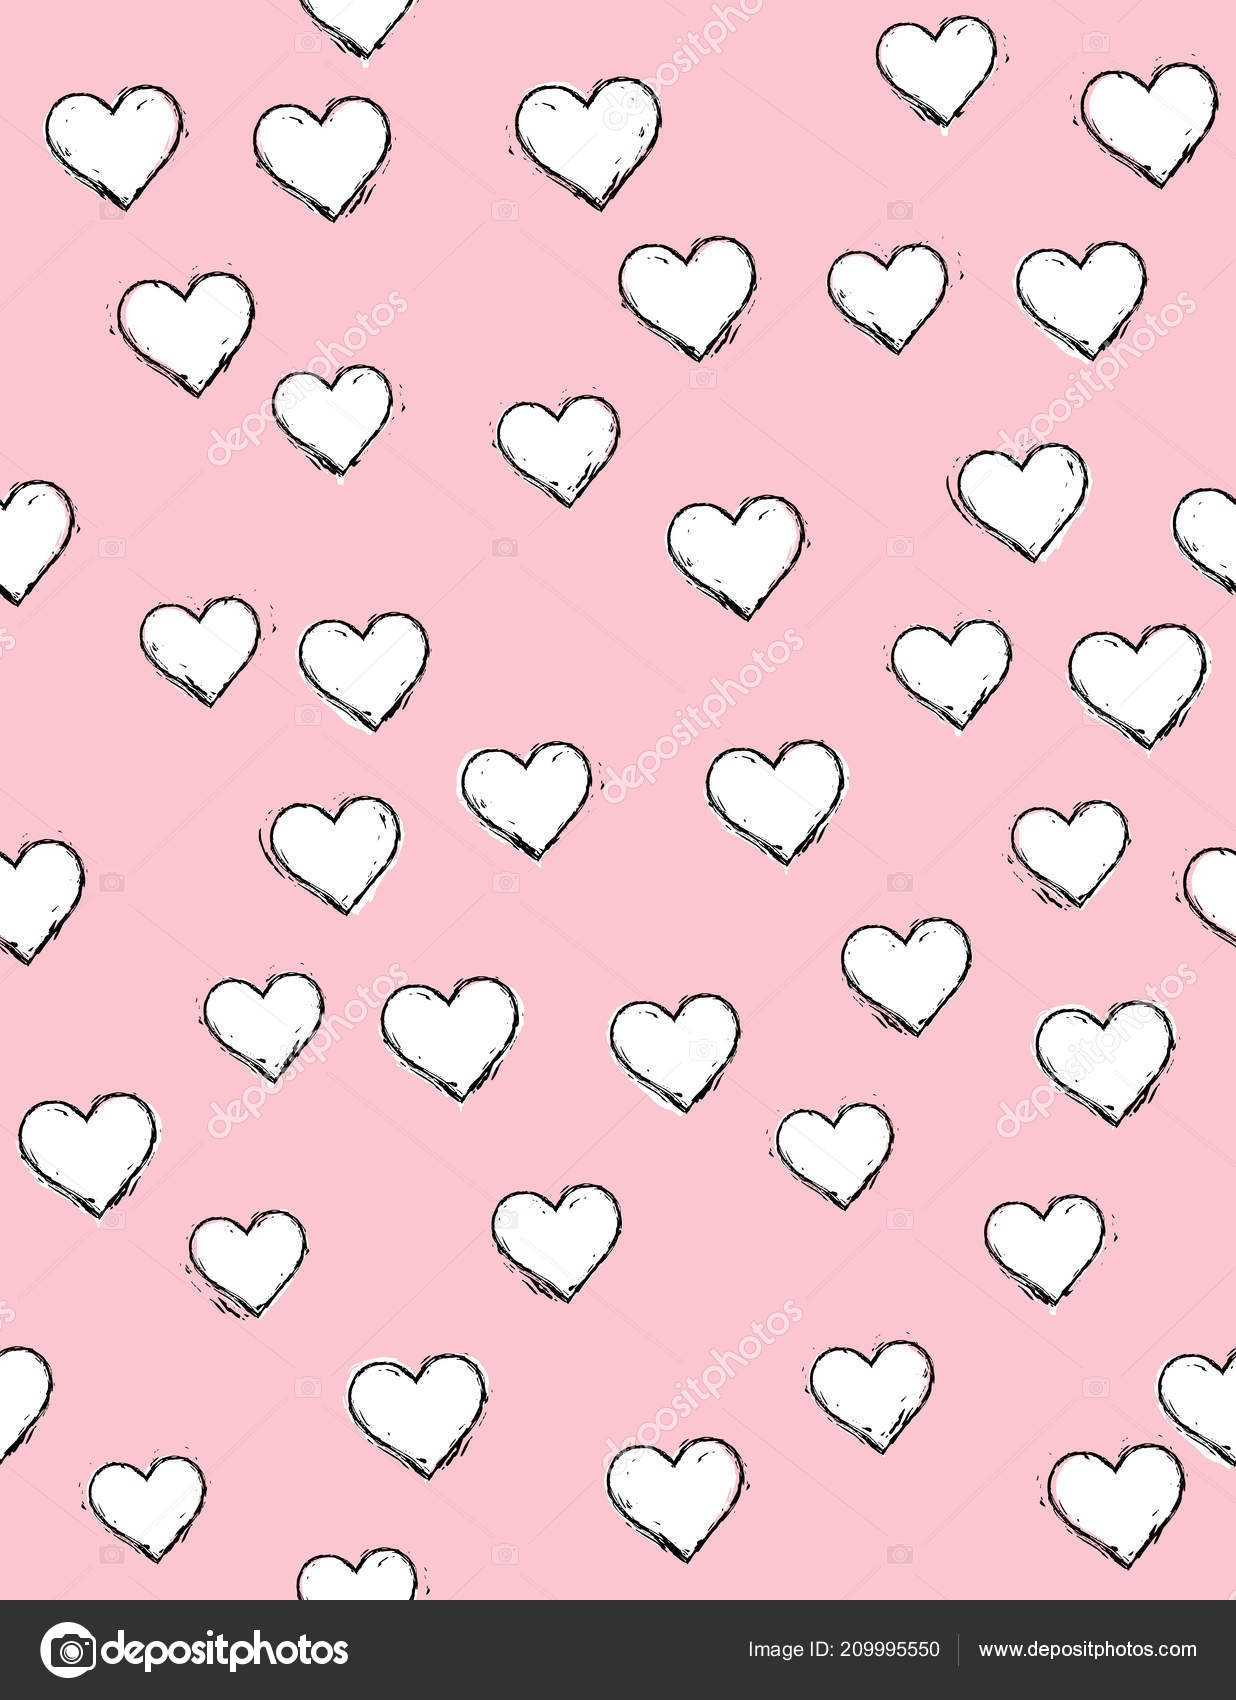 Hand Drawn Abstract Heart Vector Pattern White Hearts Black